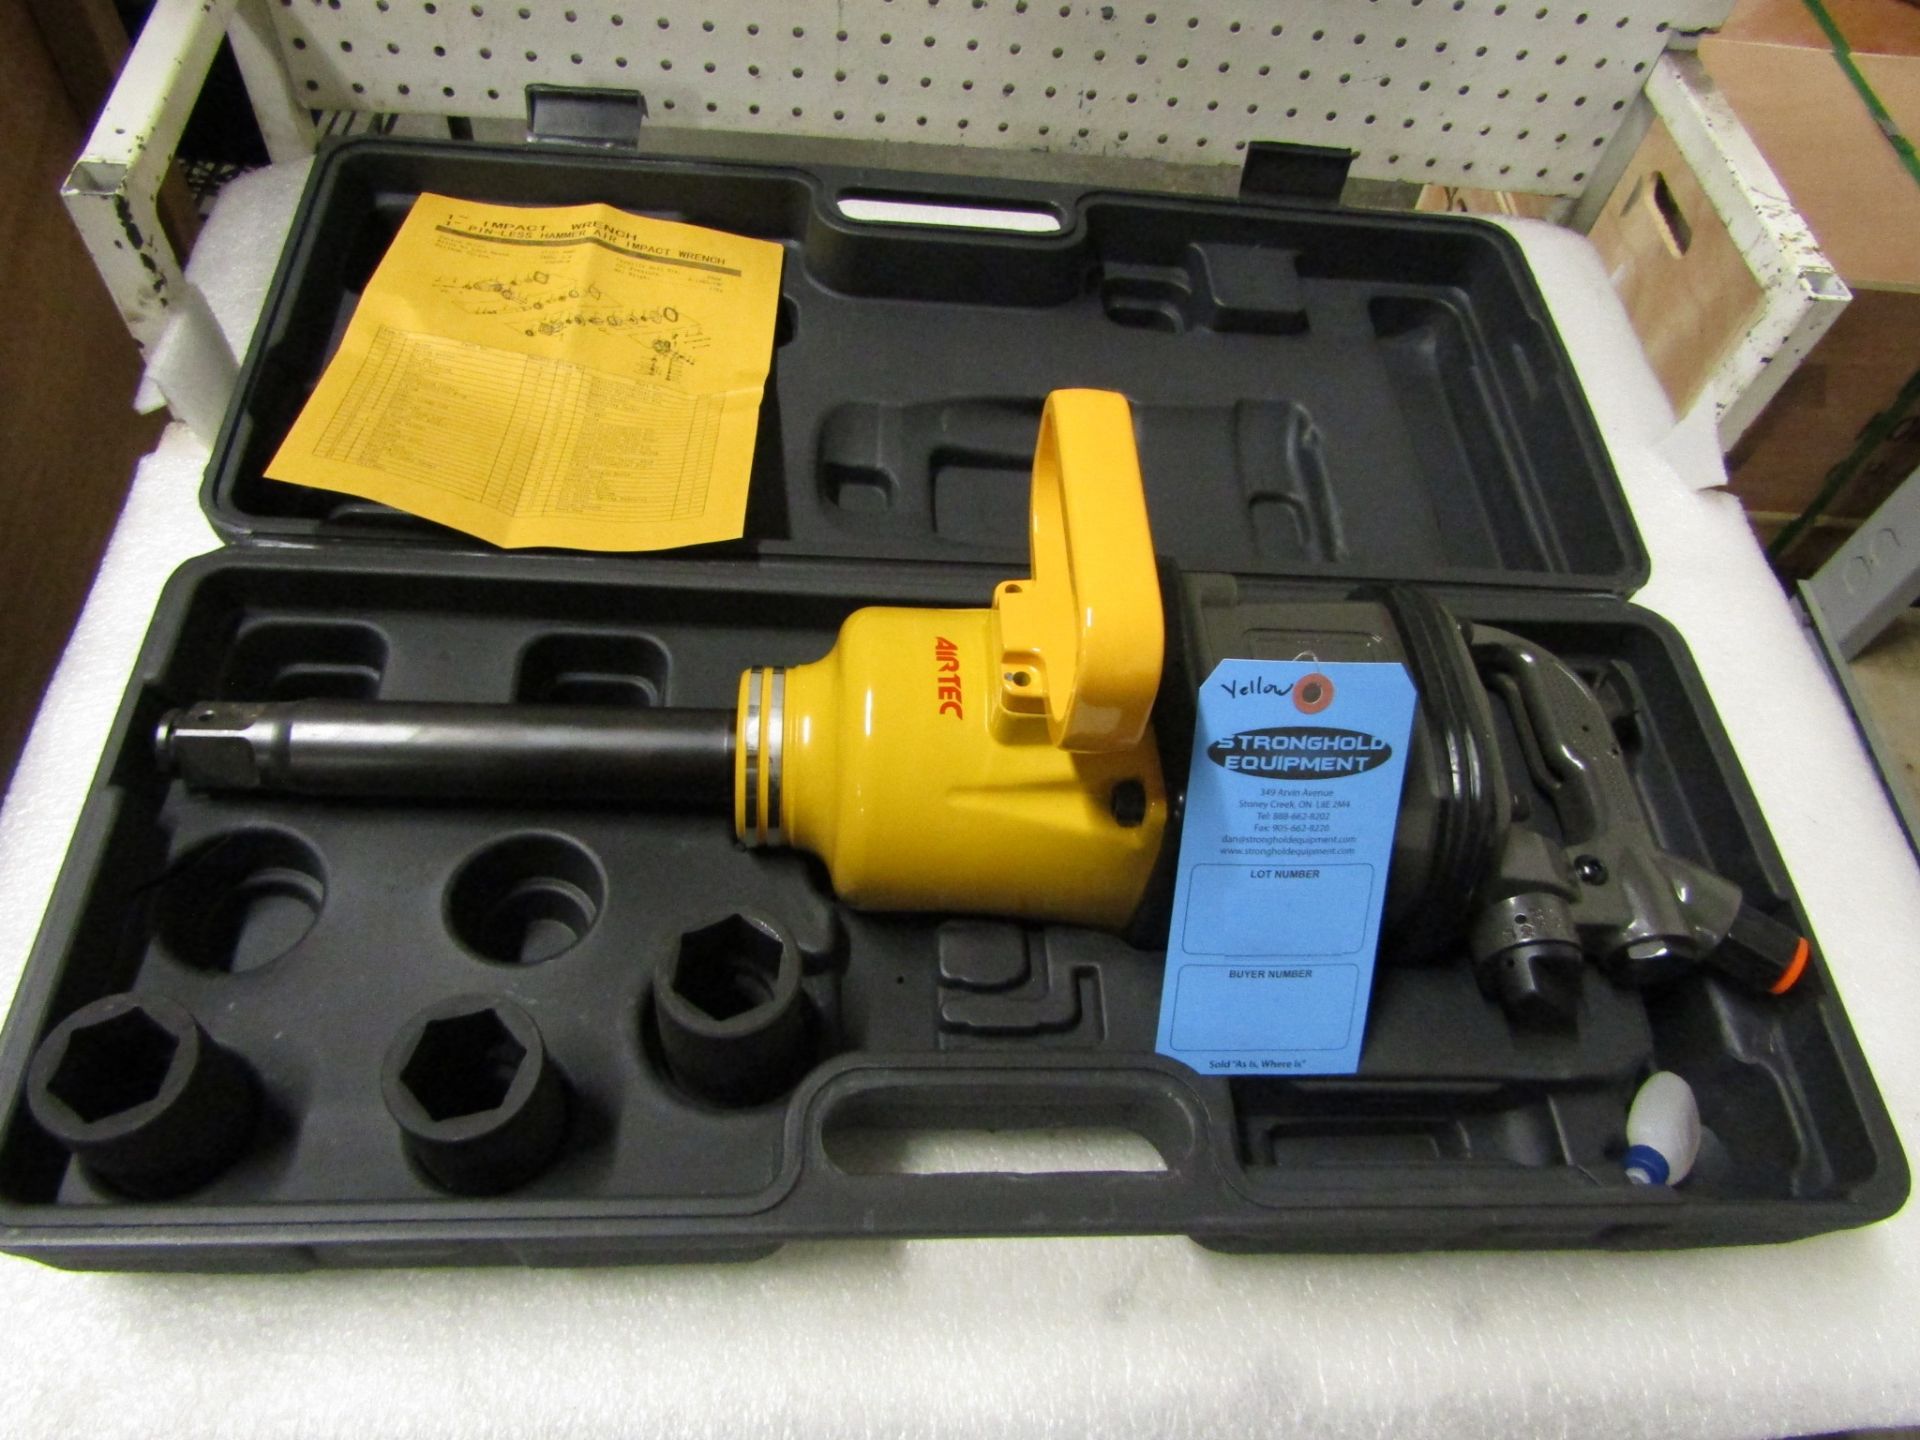 Airtec Extended Reach 1"" Drive Air Impact Wrench - MINT UNUSED impact gun complete with sockets